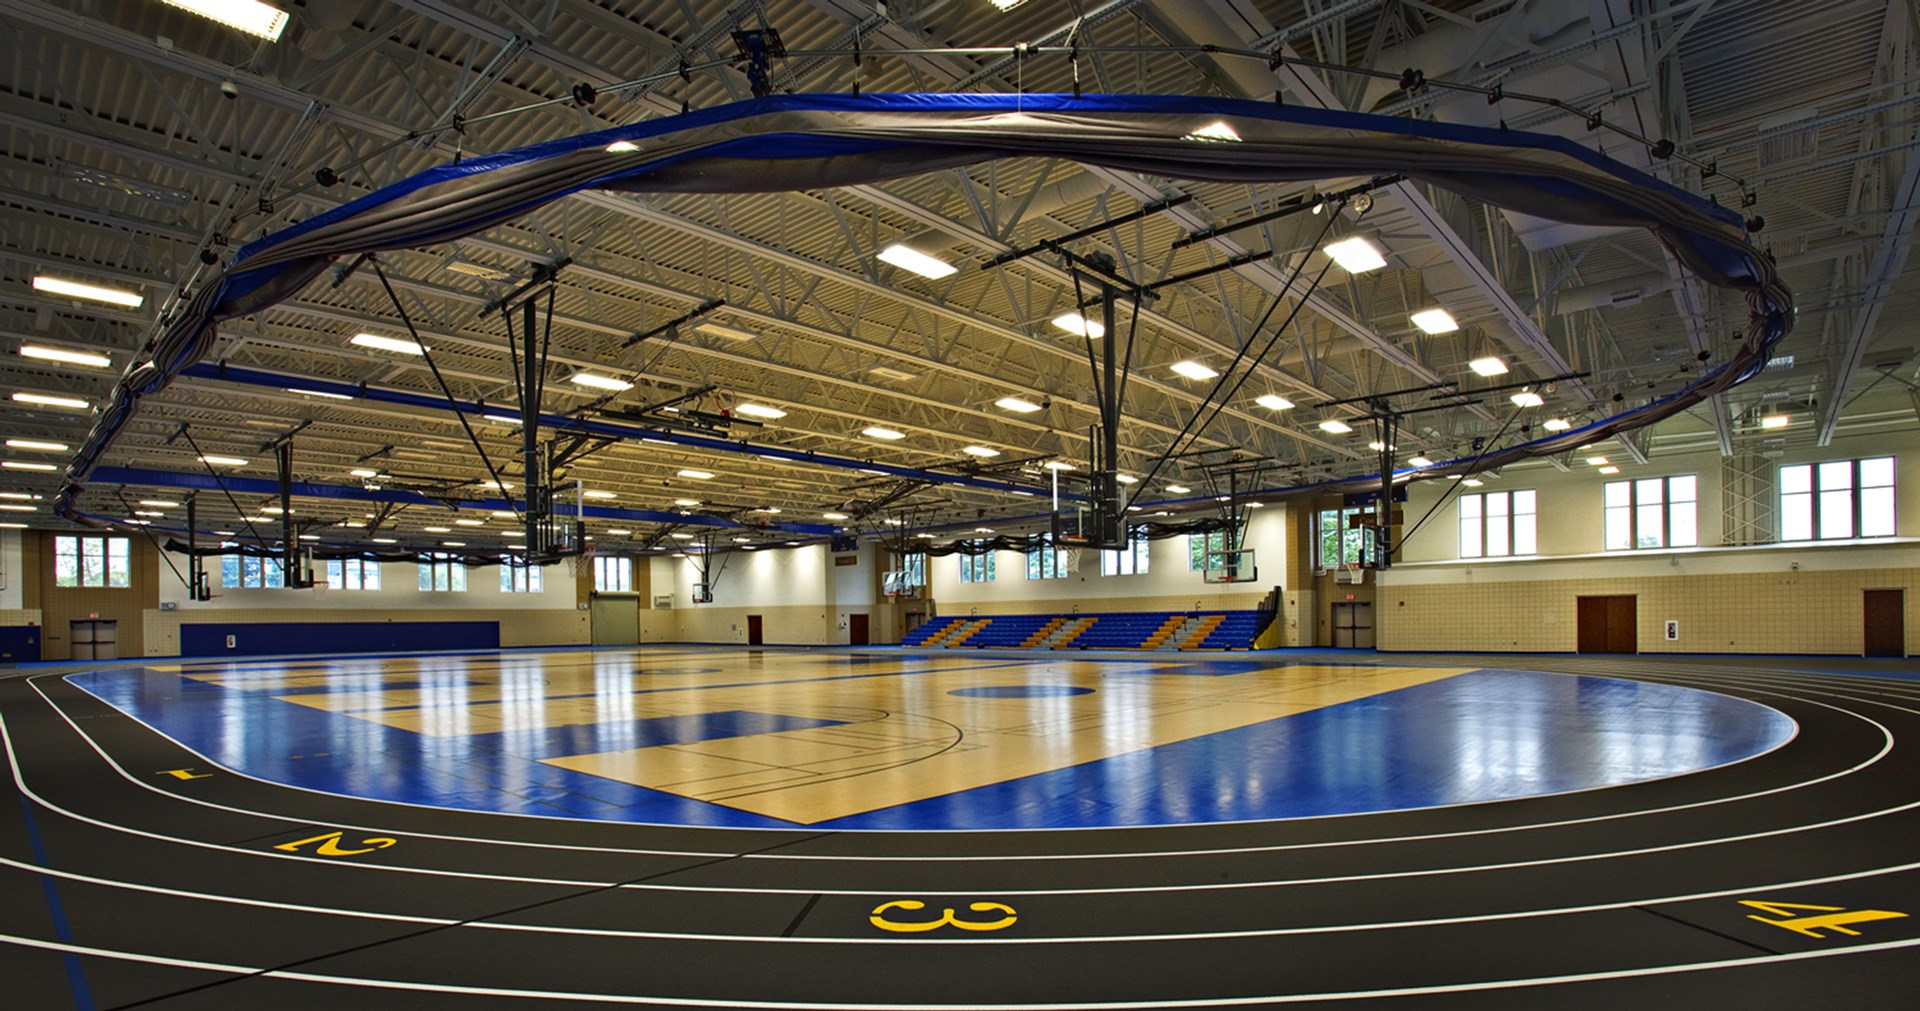 An image of a field house in a Chicago suburban high school